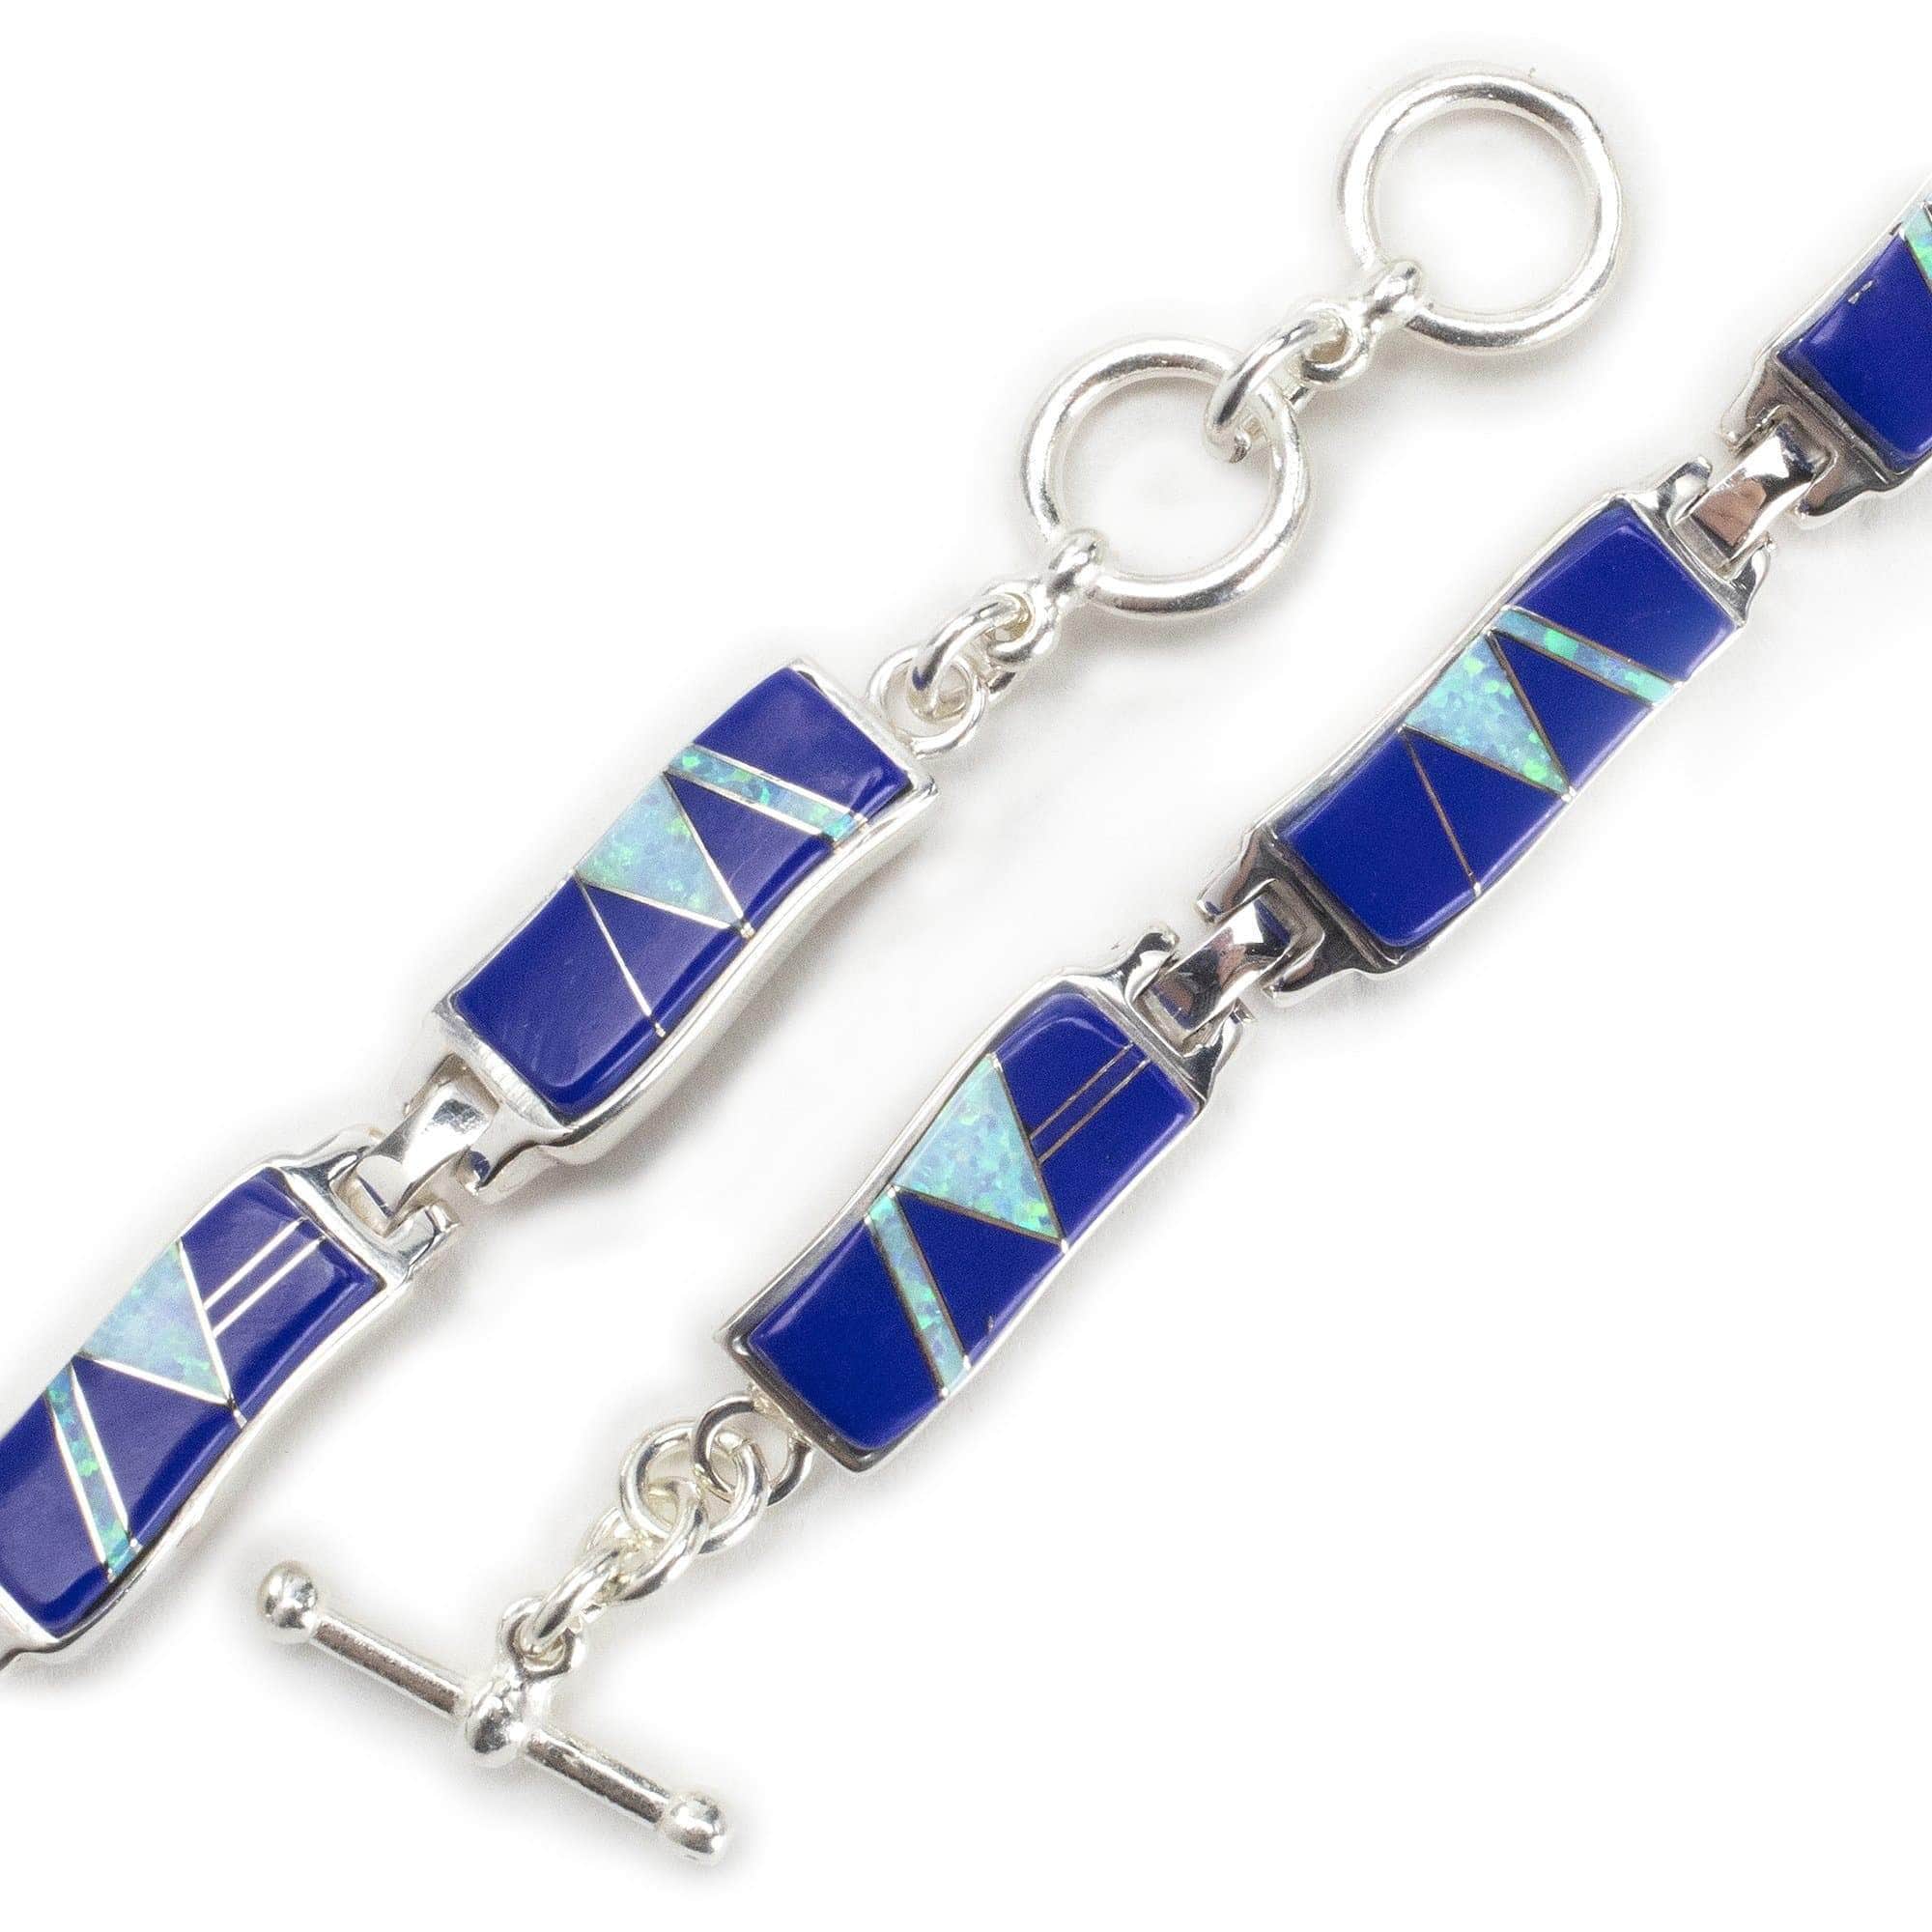 Kalifano Southwest Silver Jewelry Lapis 925 Sterling Silver Bracelet USA Handmade with Opal Accent NMB.0764.LP